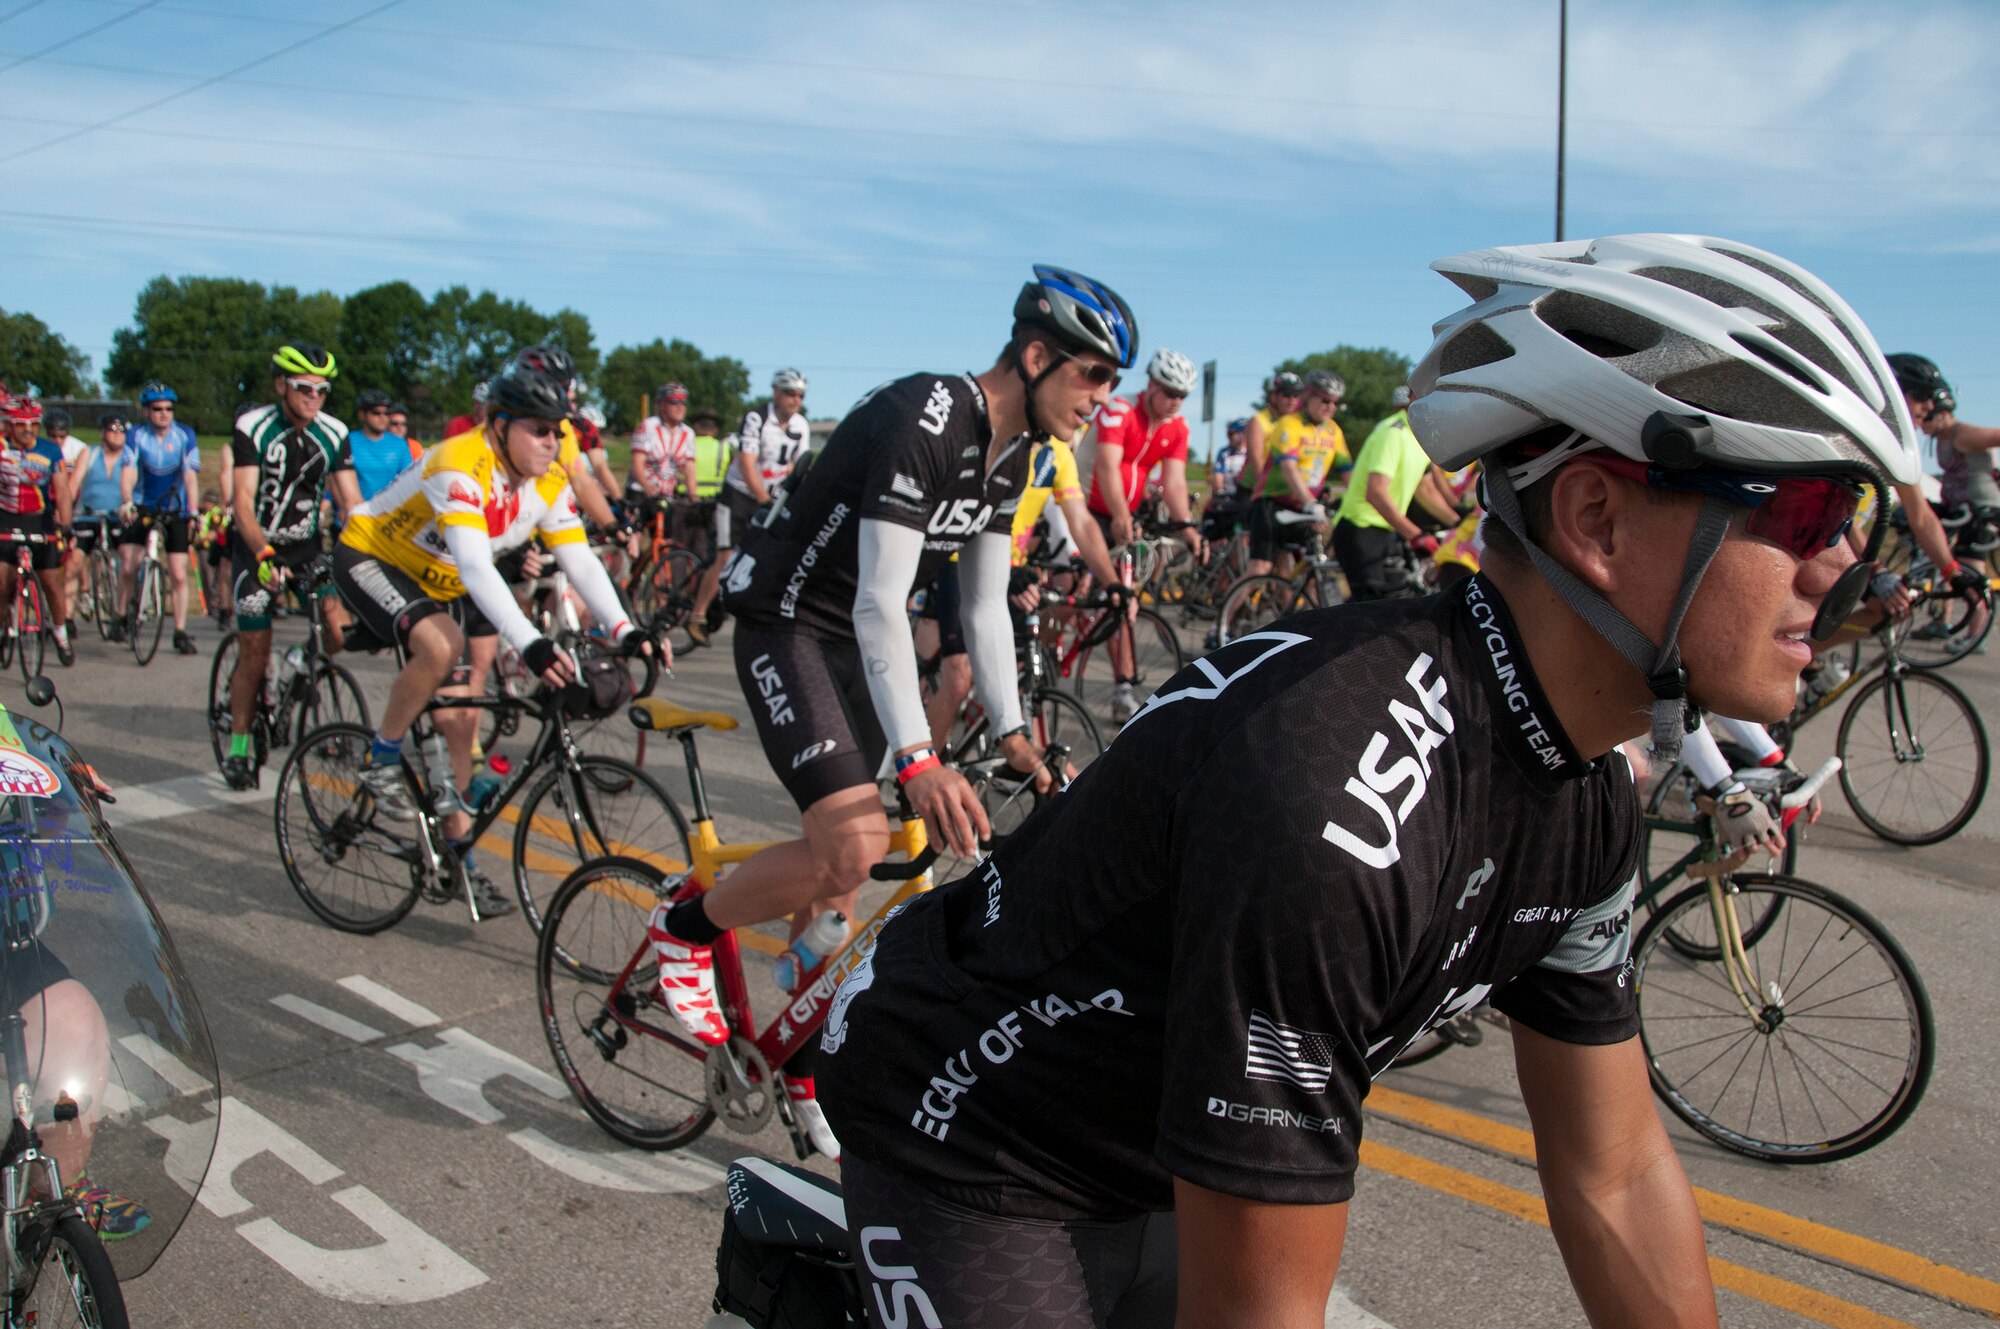 Air Force cycling team members resume riding after waiting for a freight train during the “Registers Annual Great Bike Ride Across Iowa” (RAGBRAI) in Sioux City, Iowa, on July 19, 2015. RAGBRAI participants will travel nearly 500-miles during the weeklong event, beginning in the western side of the state in Sioux City and ending in the Quad Cities in Davenport, Iowa, along the Mississippi river.
(U.S. Air National Guard Photo by: Tech Sgt. Oscar Sanchez/185th ARW Wing Public Affairs Released)

